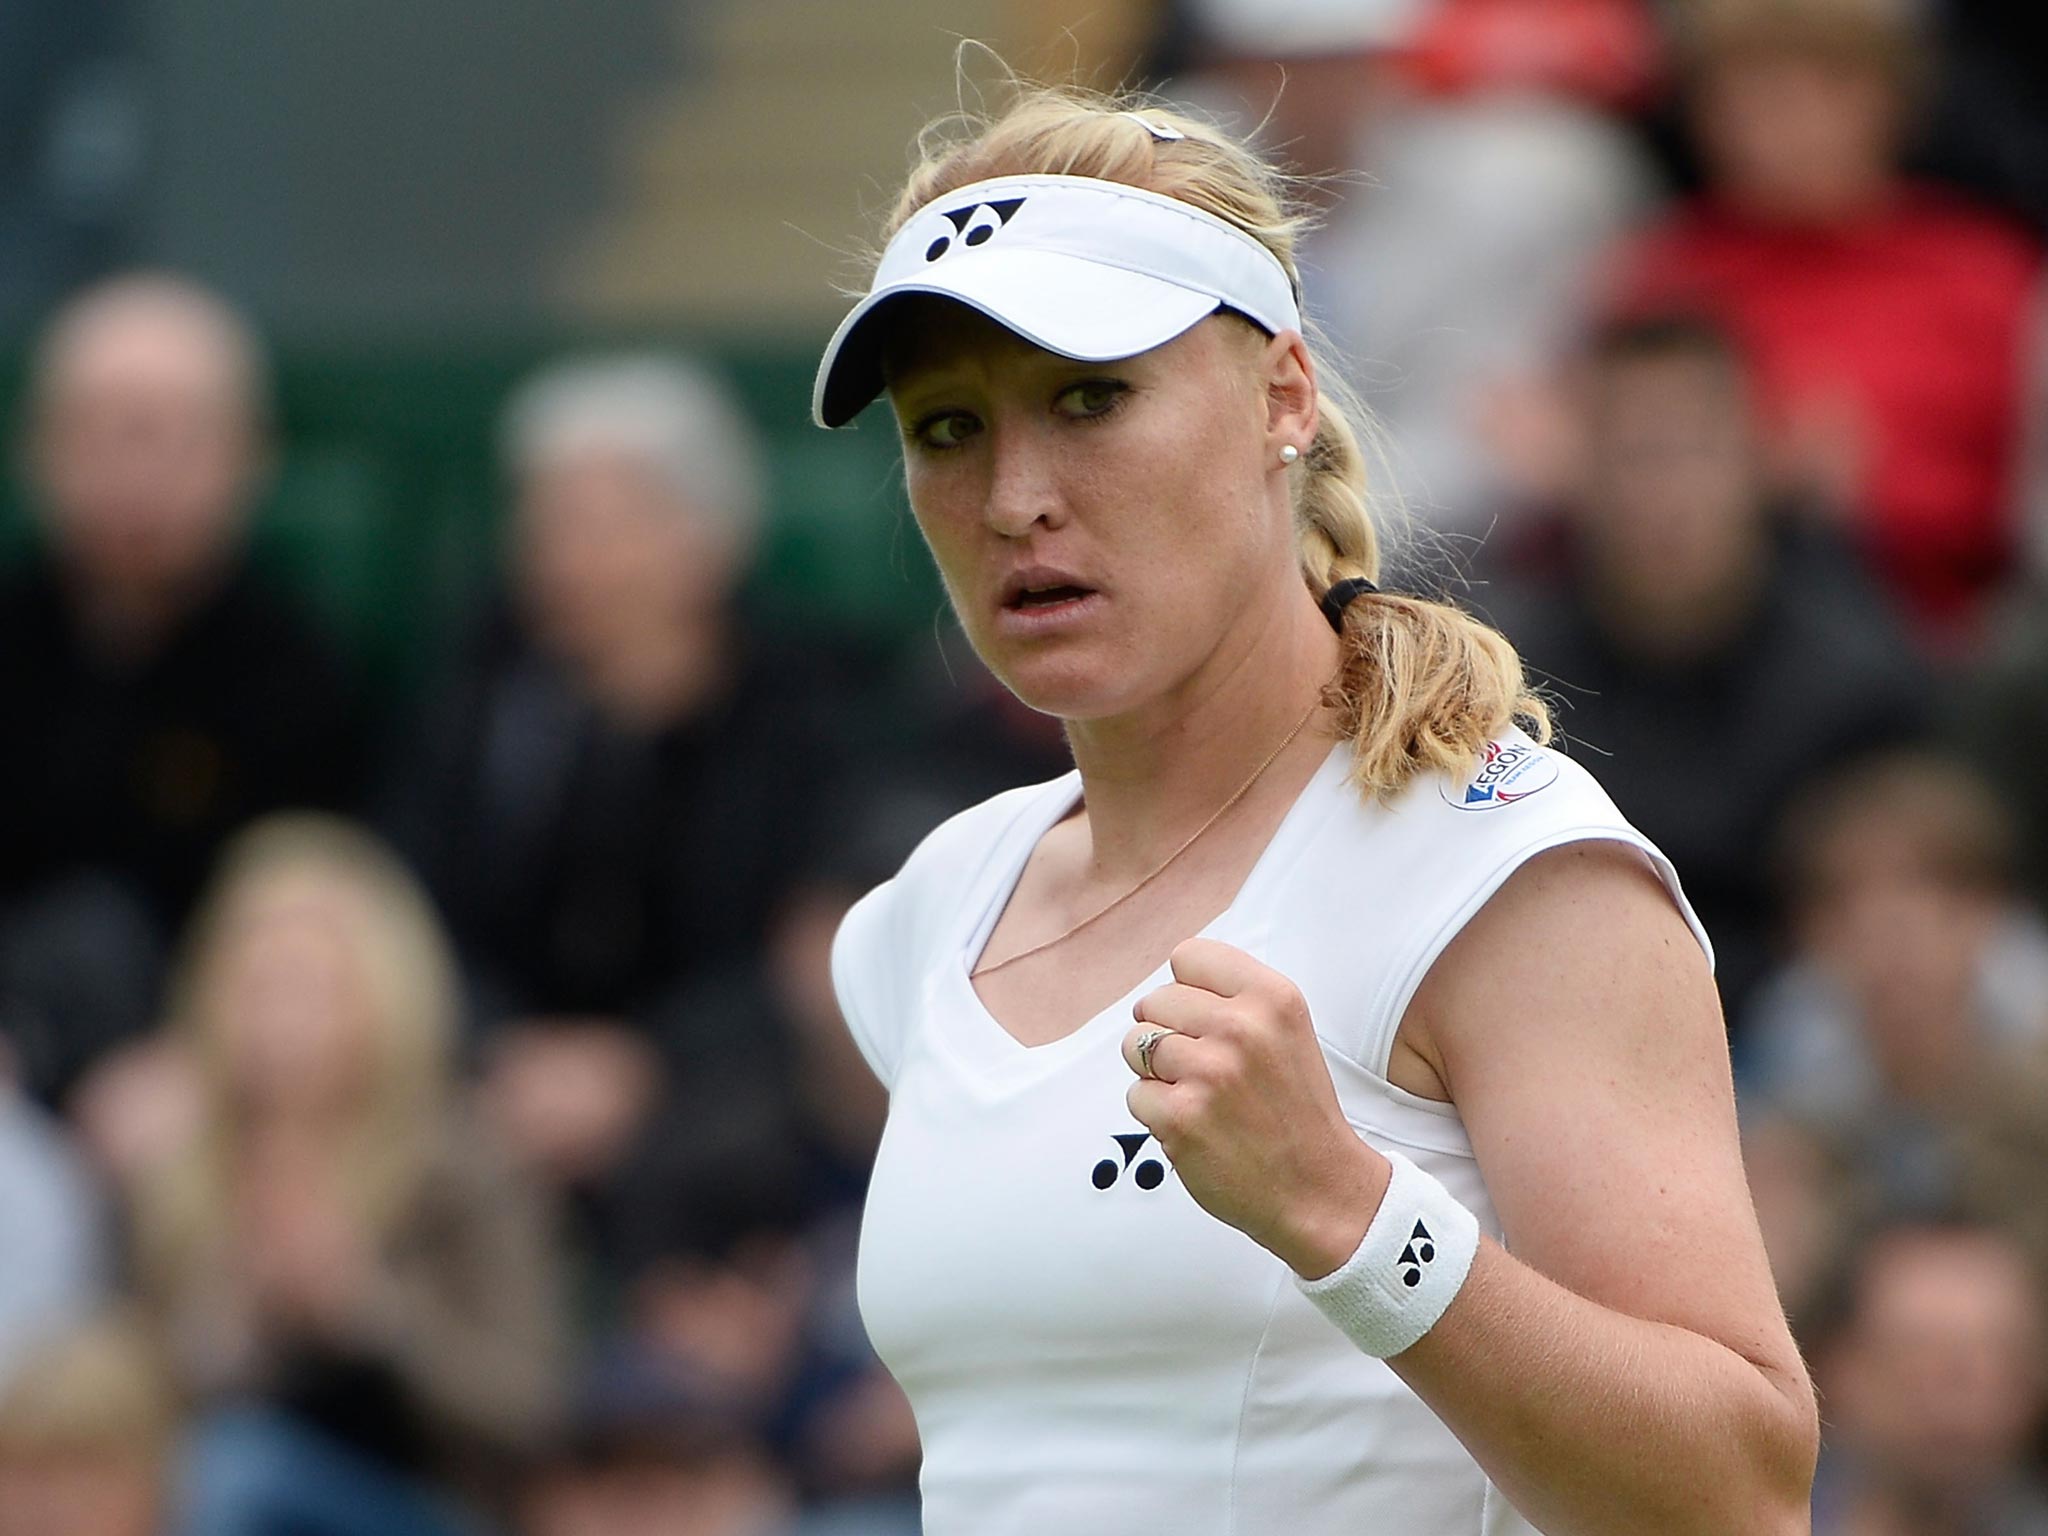 Elena Baltacha died of liver cancer in May, less than six
months after retiring